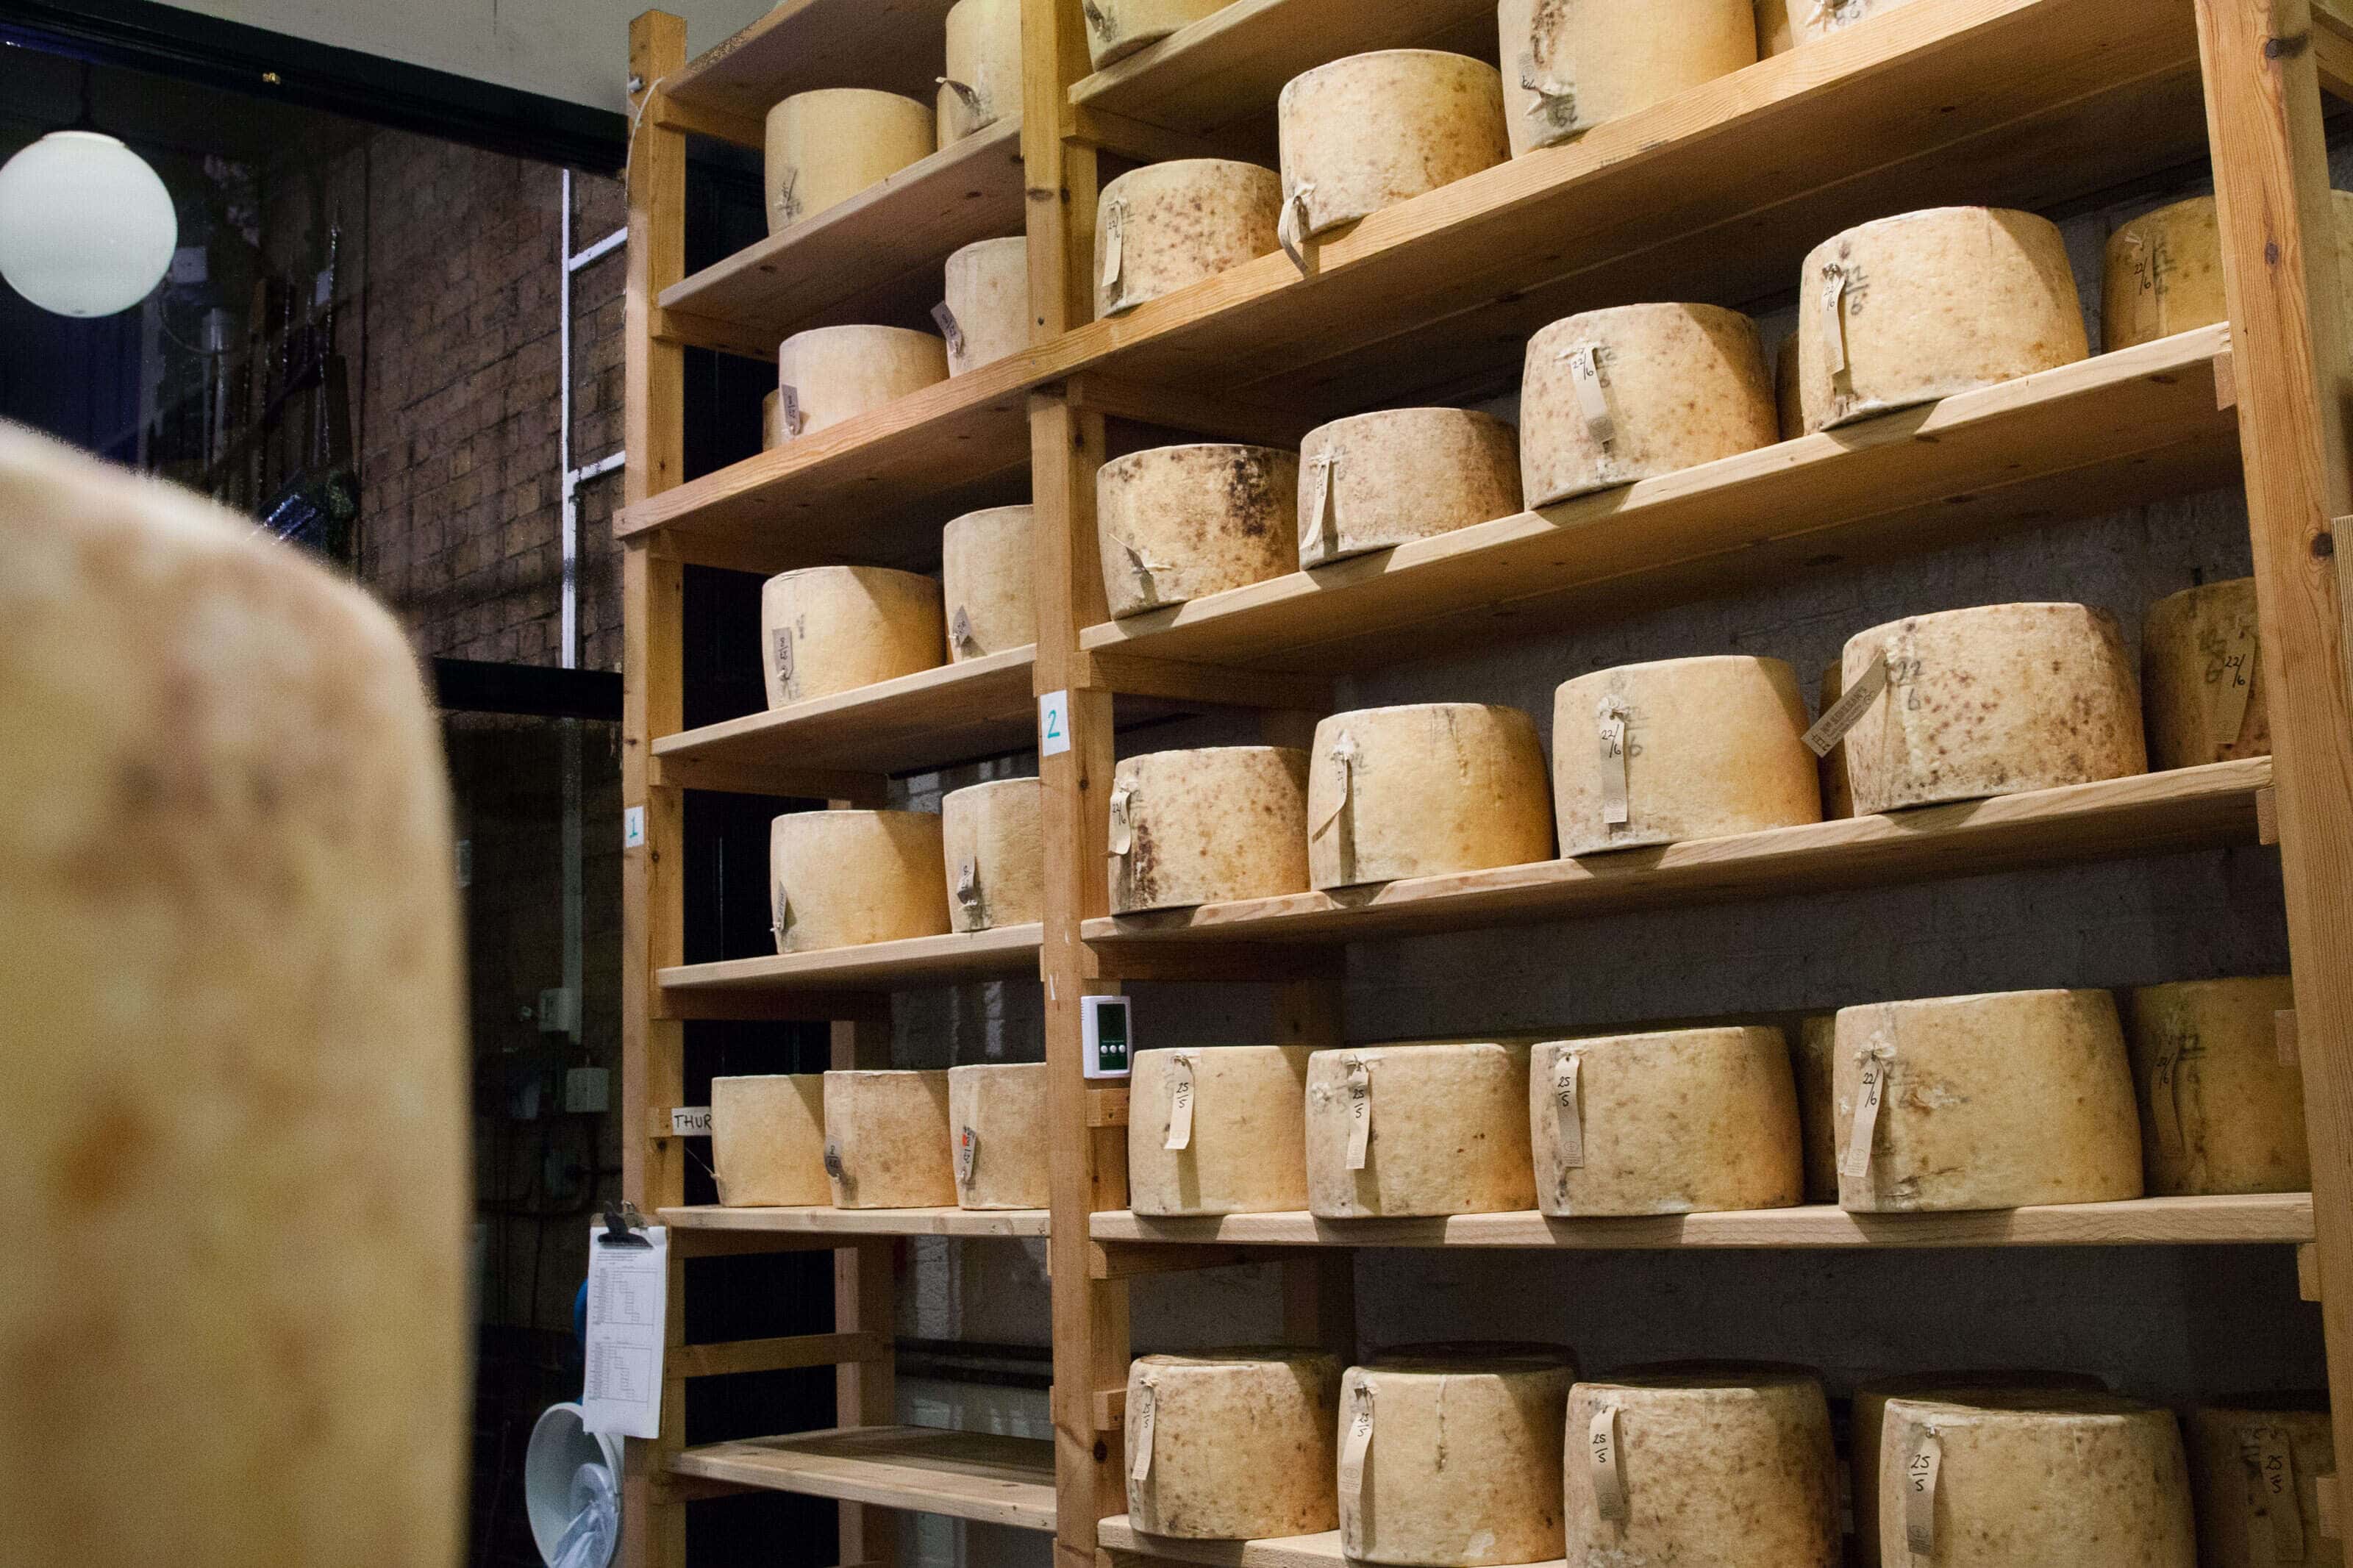 whole rounds of cheese stored on a shelf